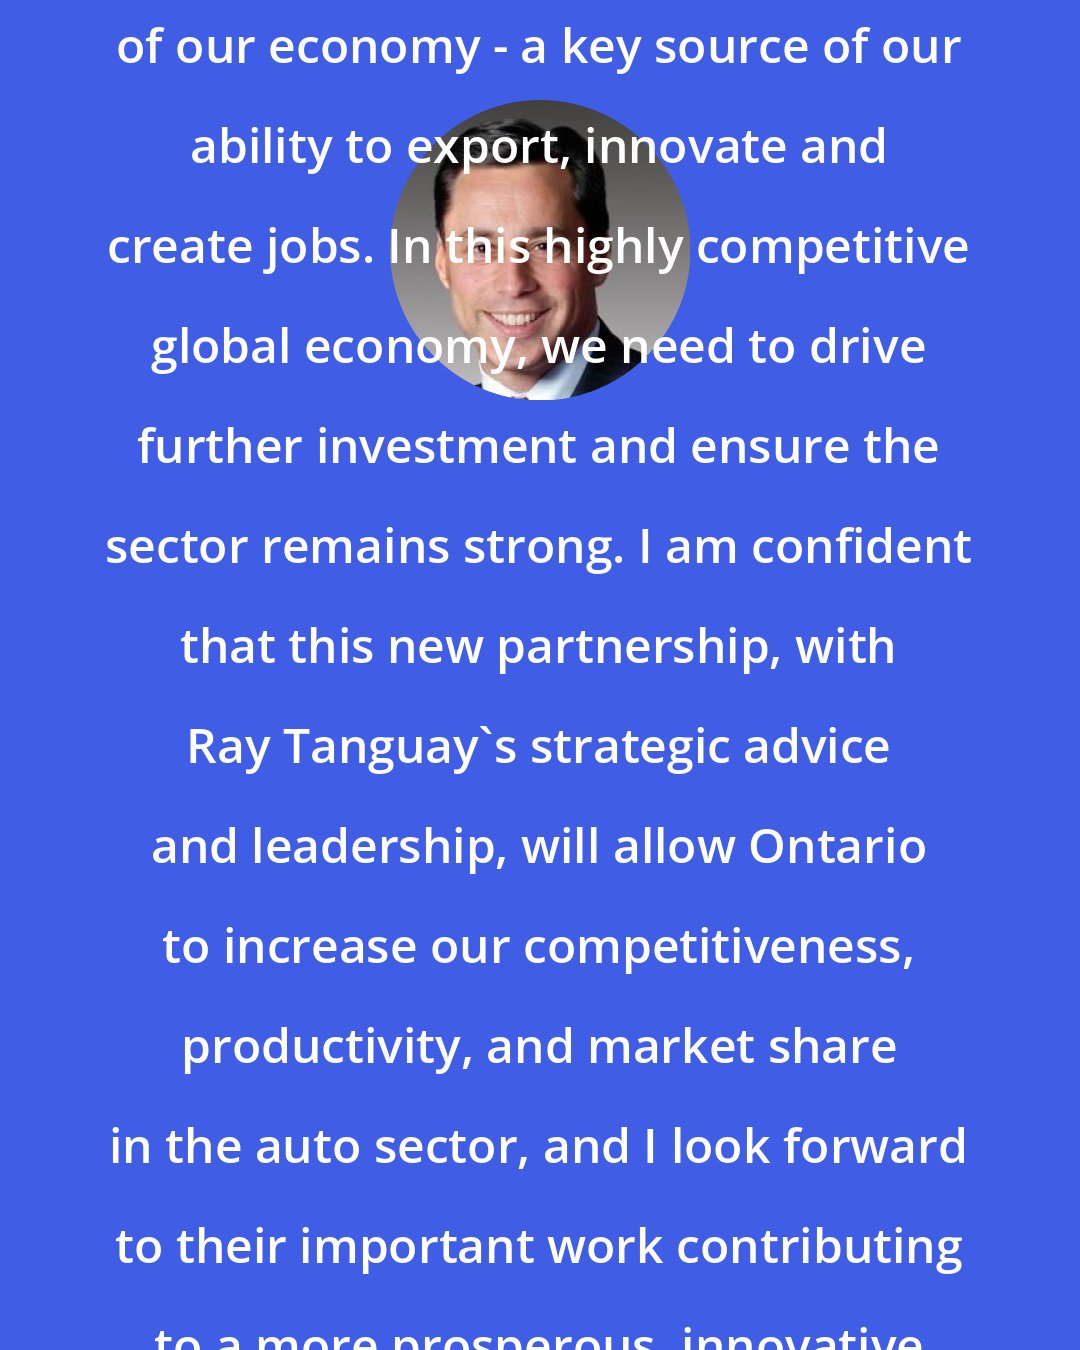 Brad Duguid: Ontario's auto sector is a cornerstone of our economy - a key source of our ability to export, innovate and create jobs. In this highly competitive global economy, we need to drive further investment and ensure the sector remains strong. I am confident that this new partnership, with Ray Tanguay's strategic advice and leadership, will allow Ontario to increase our competitiveness, productivity, and market share in the auto sector, and I look forward to their important work contributing to a more prosperous, innovative Ontario economy.